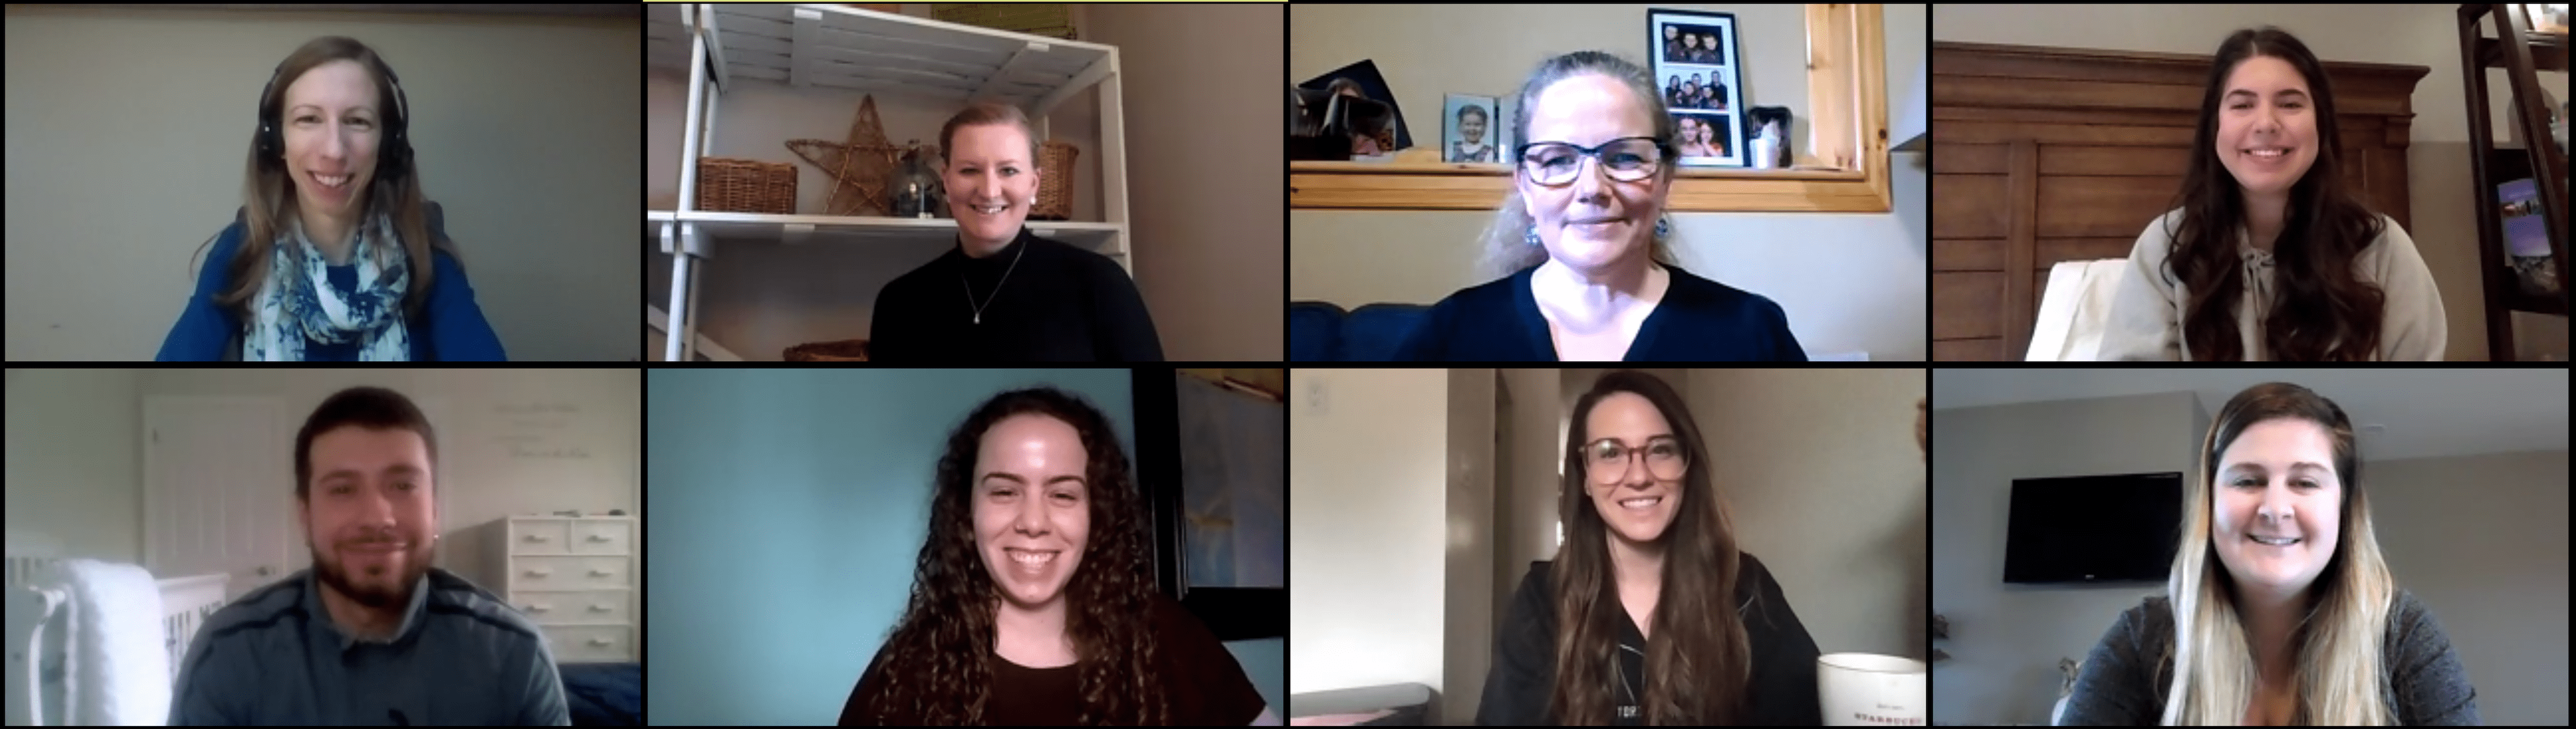 2020 teaching award recipients, smiling over Zoom from virtual ceremony